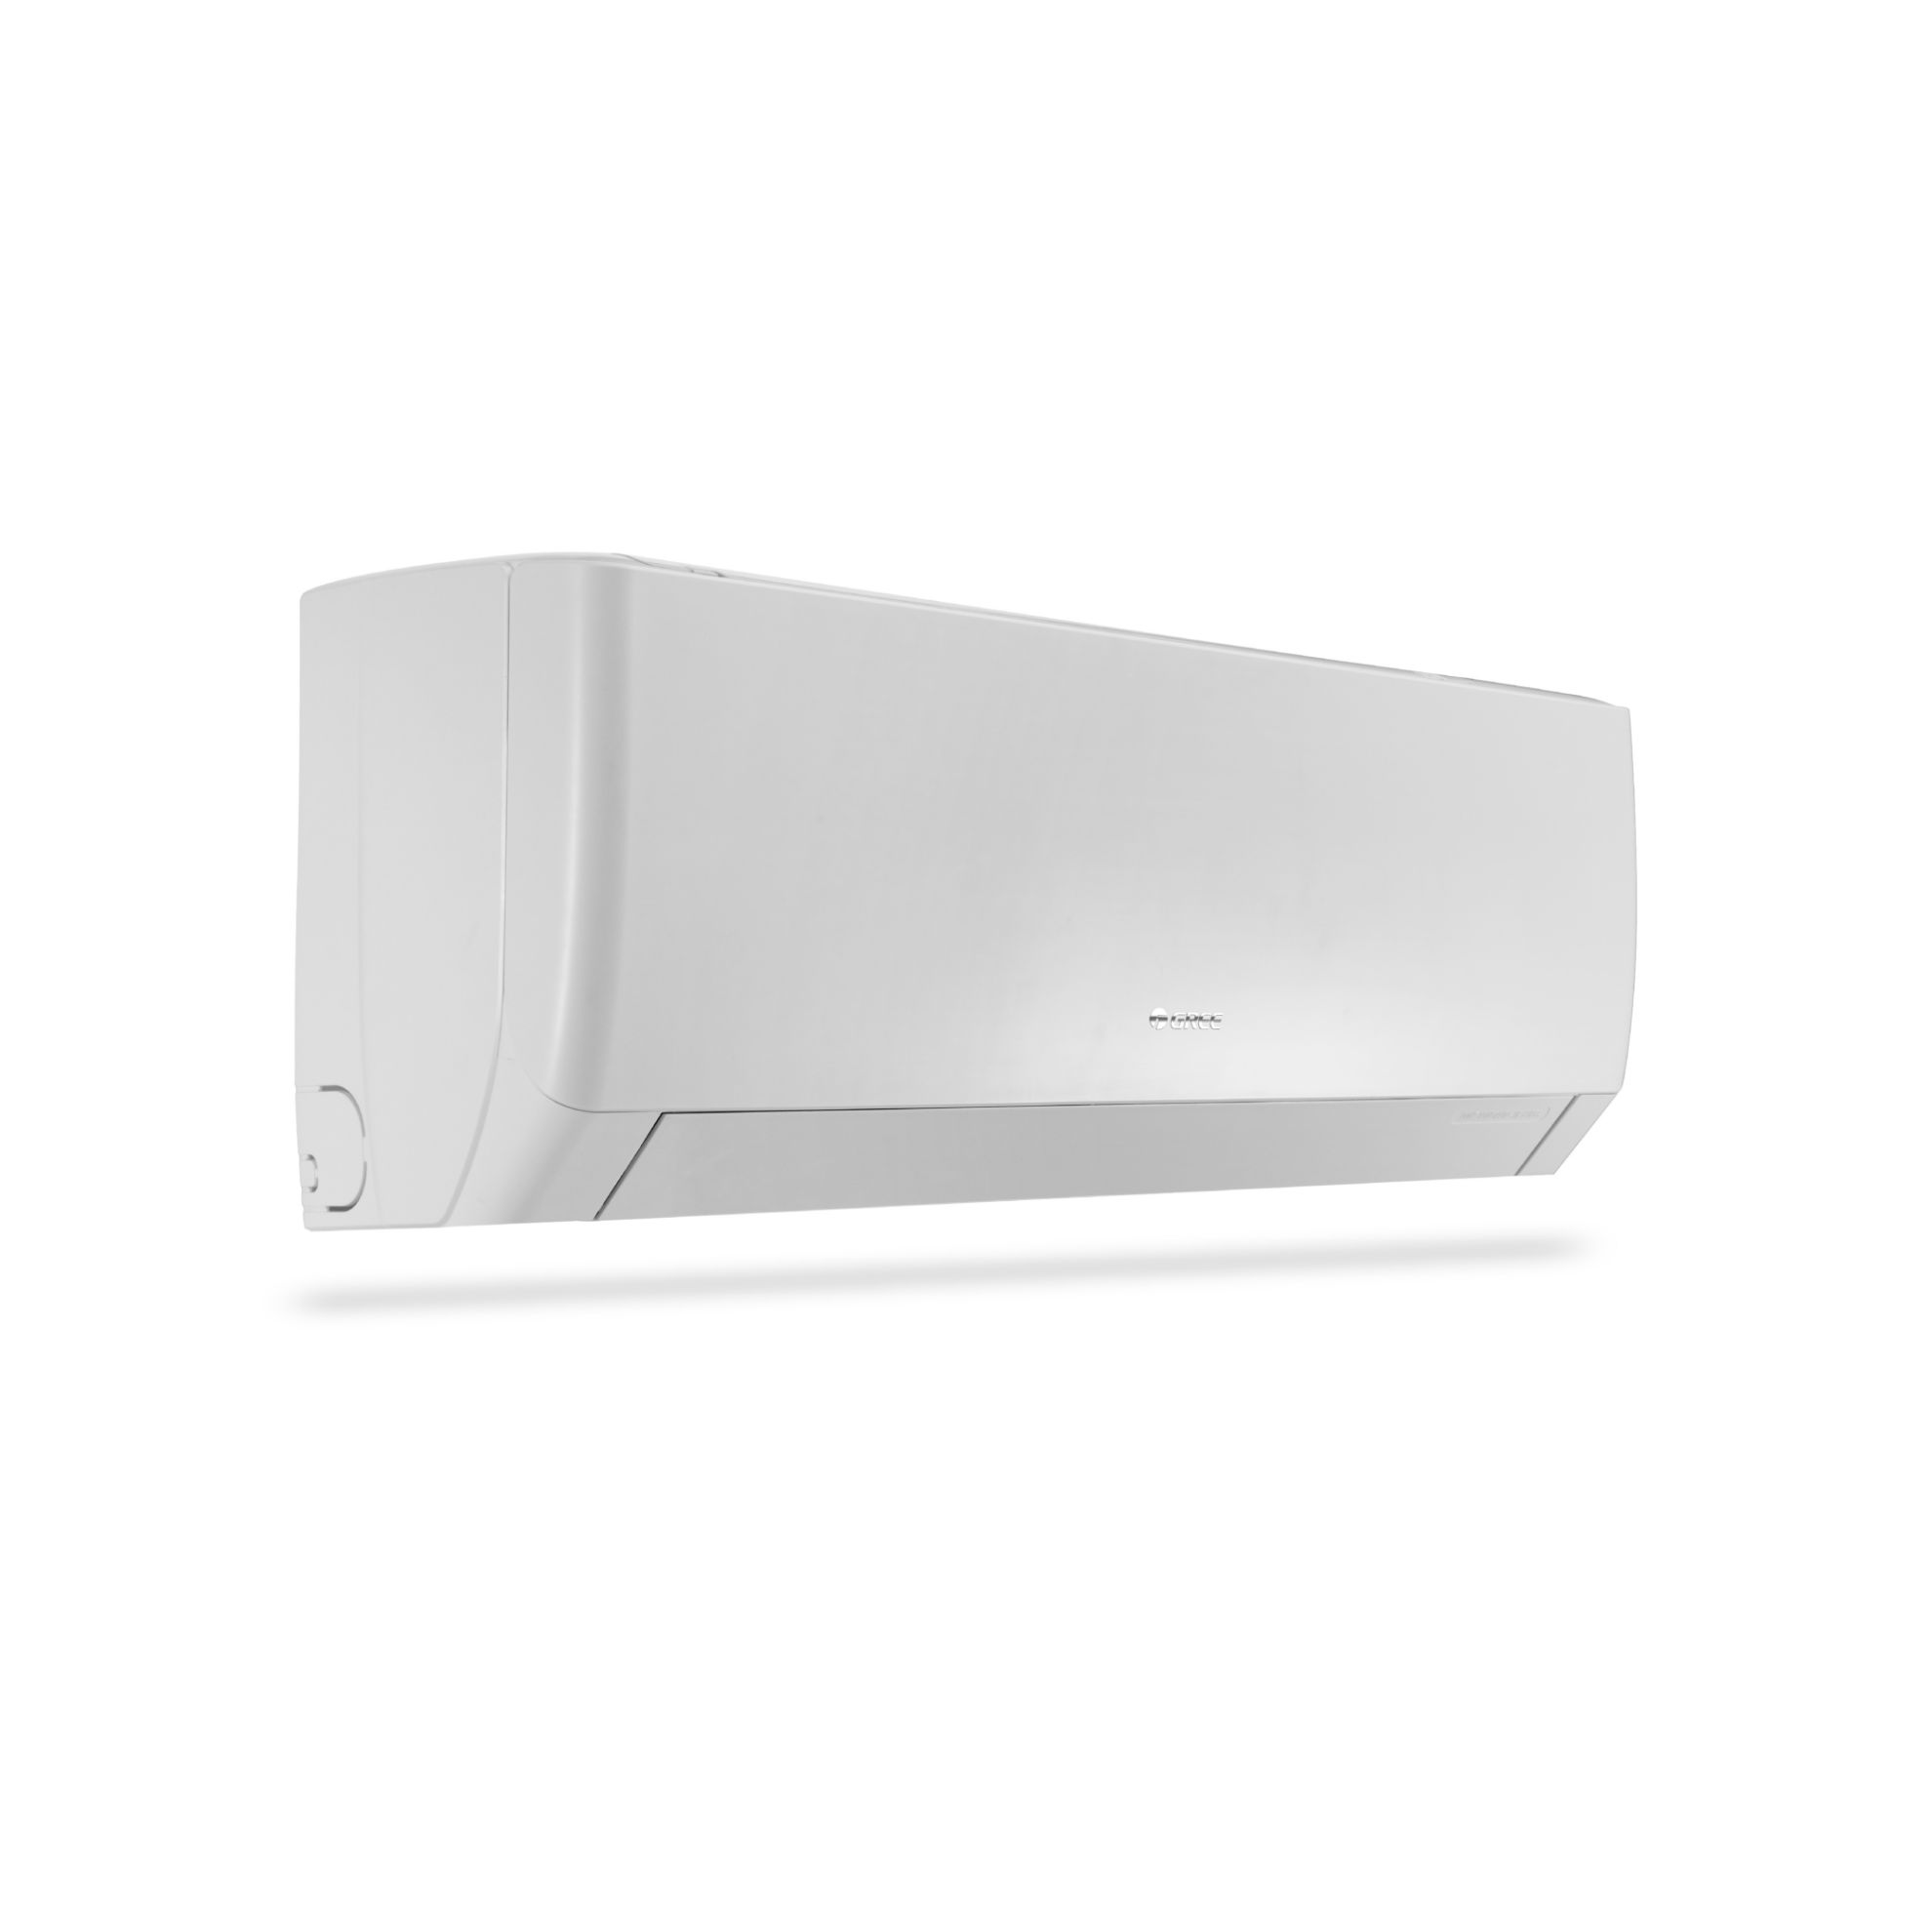 Picture of Gree - PULAR-R18C3 - 1.5 Ton|Rotary|Wall Split AC